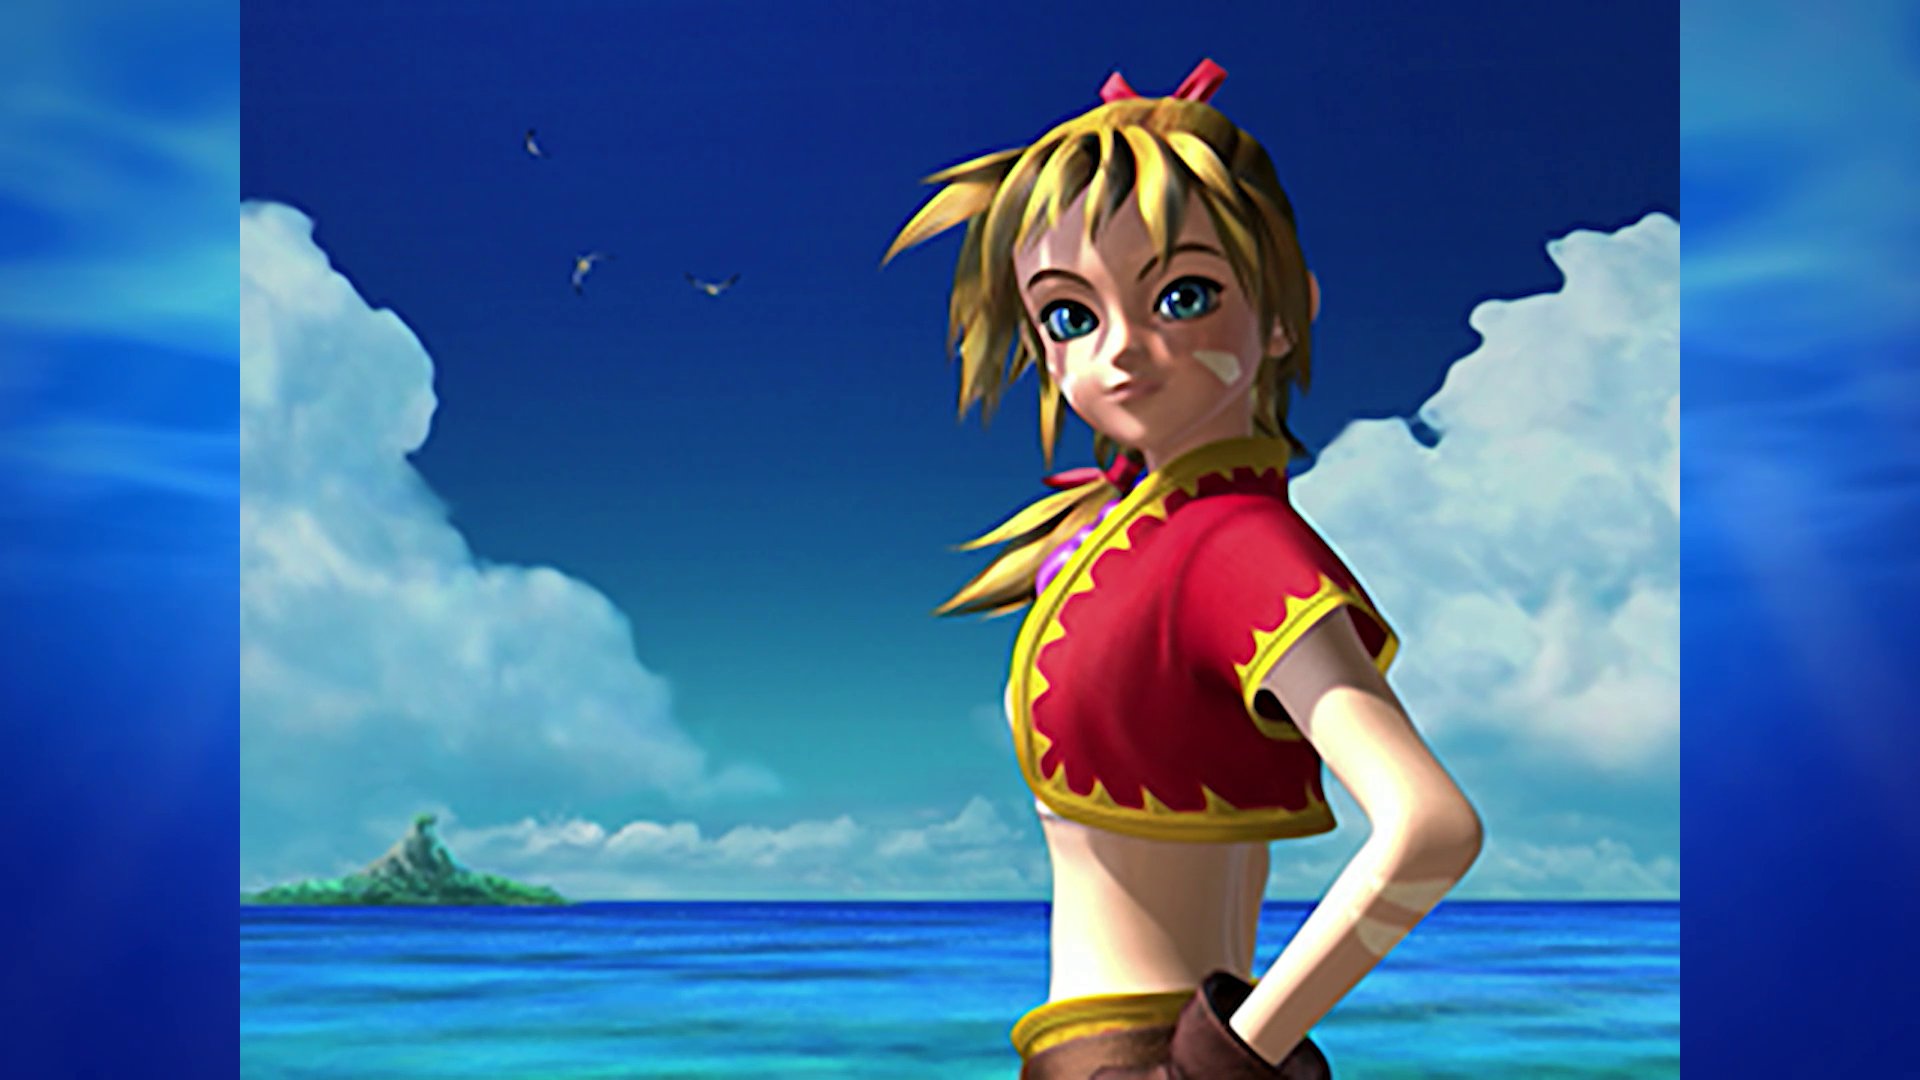 Chrono Cross: The Radical Dreamers Edition is a long-awaited remaster